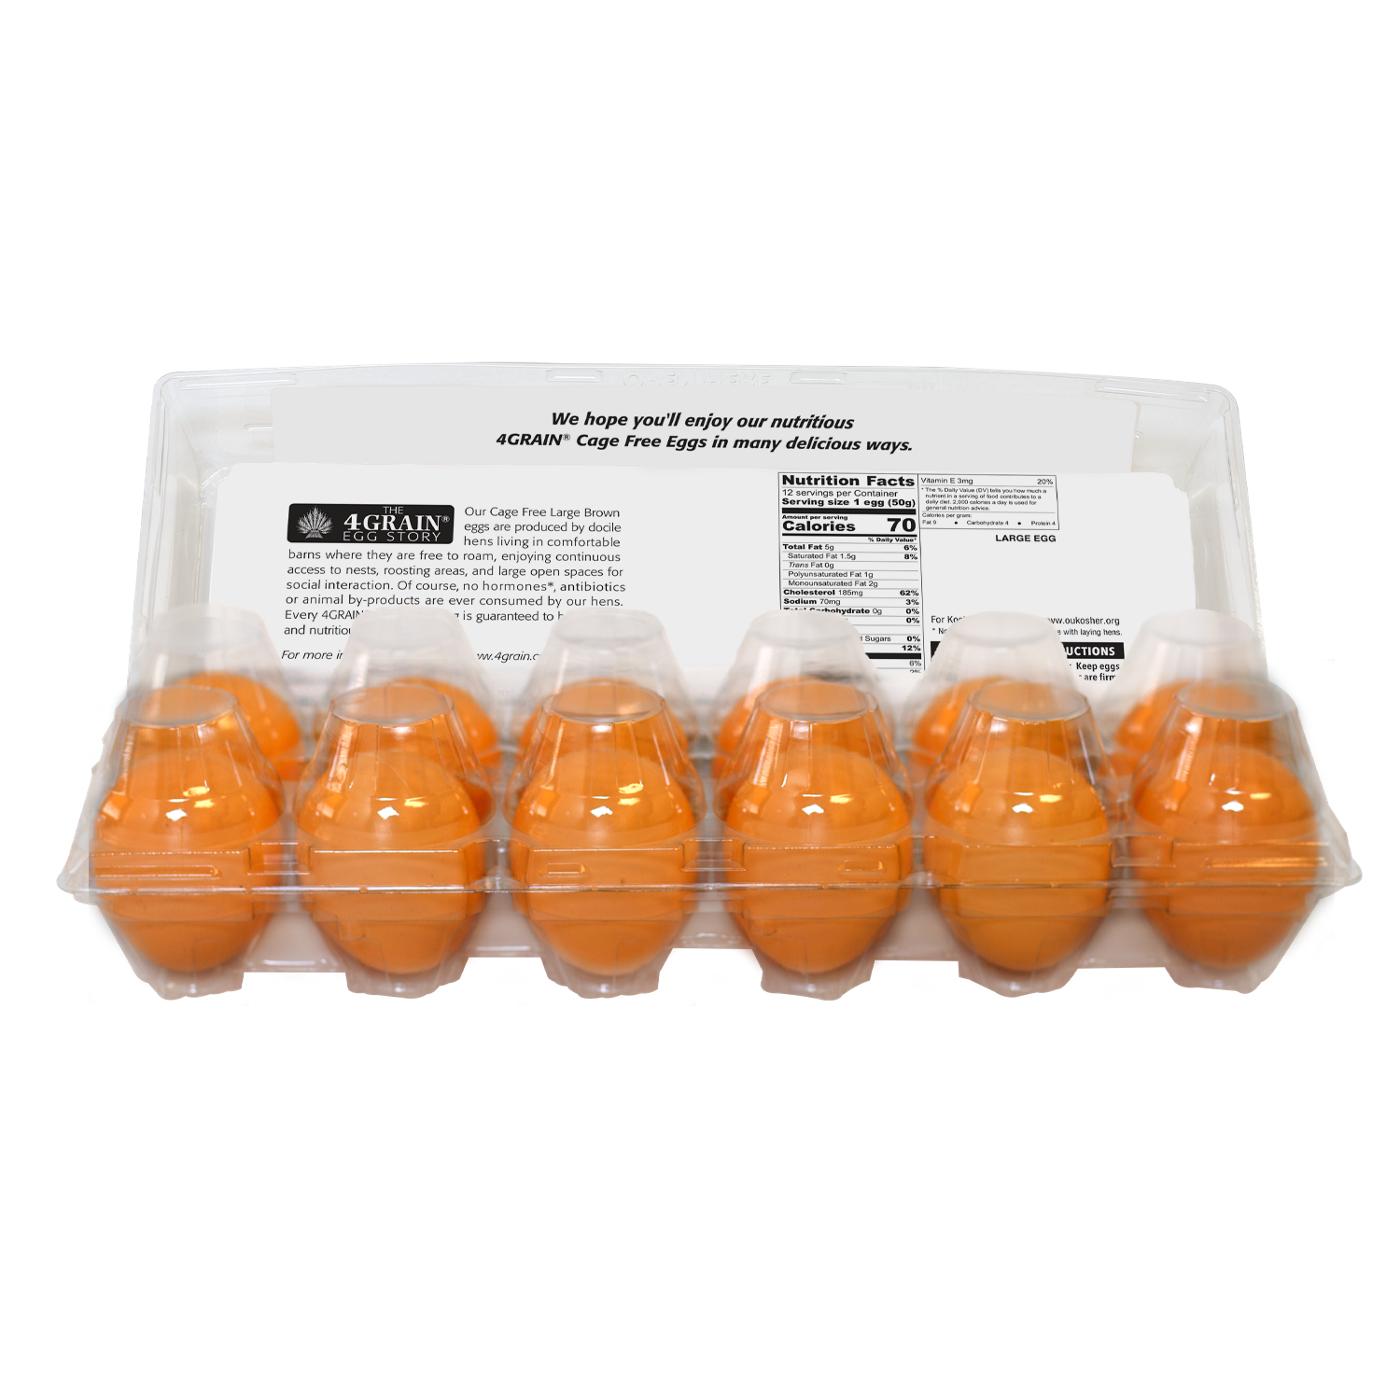 4 Grain Grade A Cage Free Large Brown Eggs; image 2 of 4